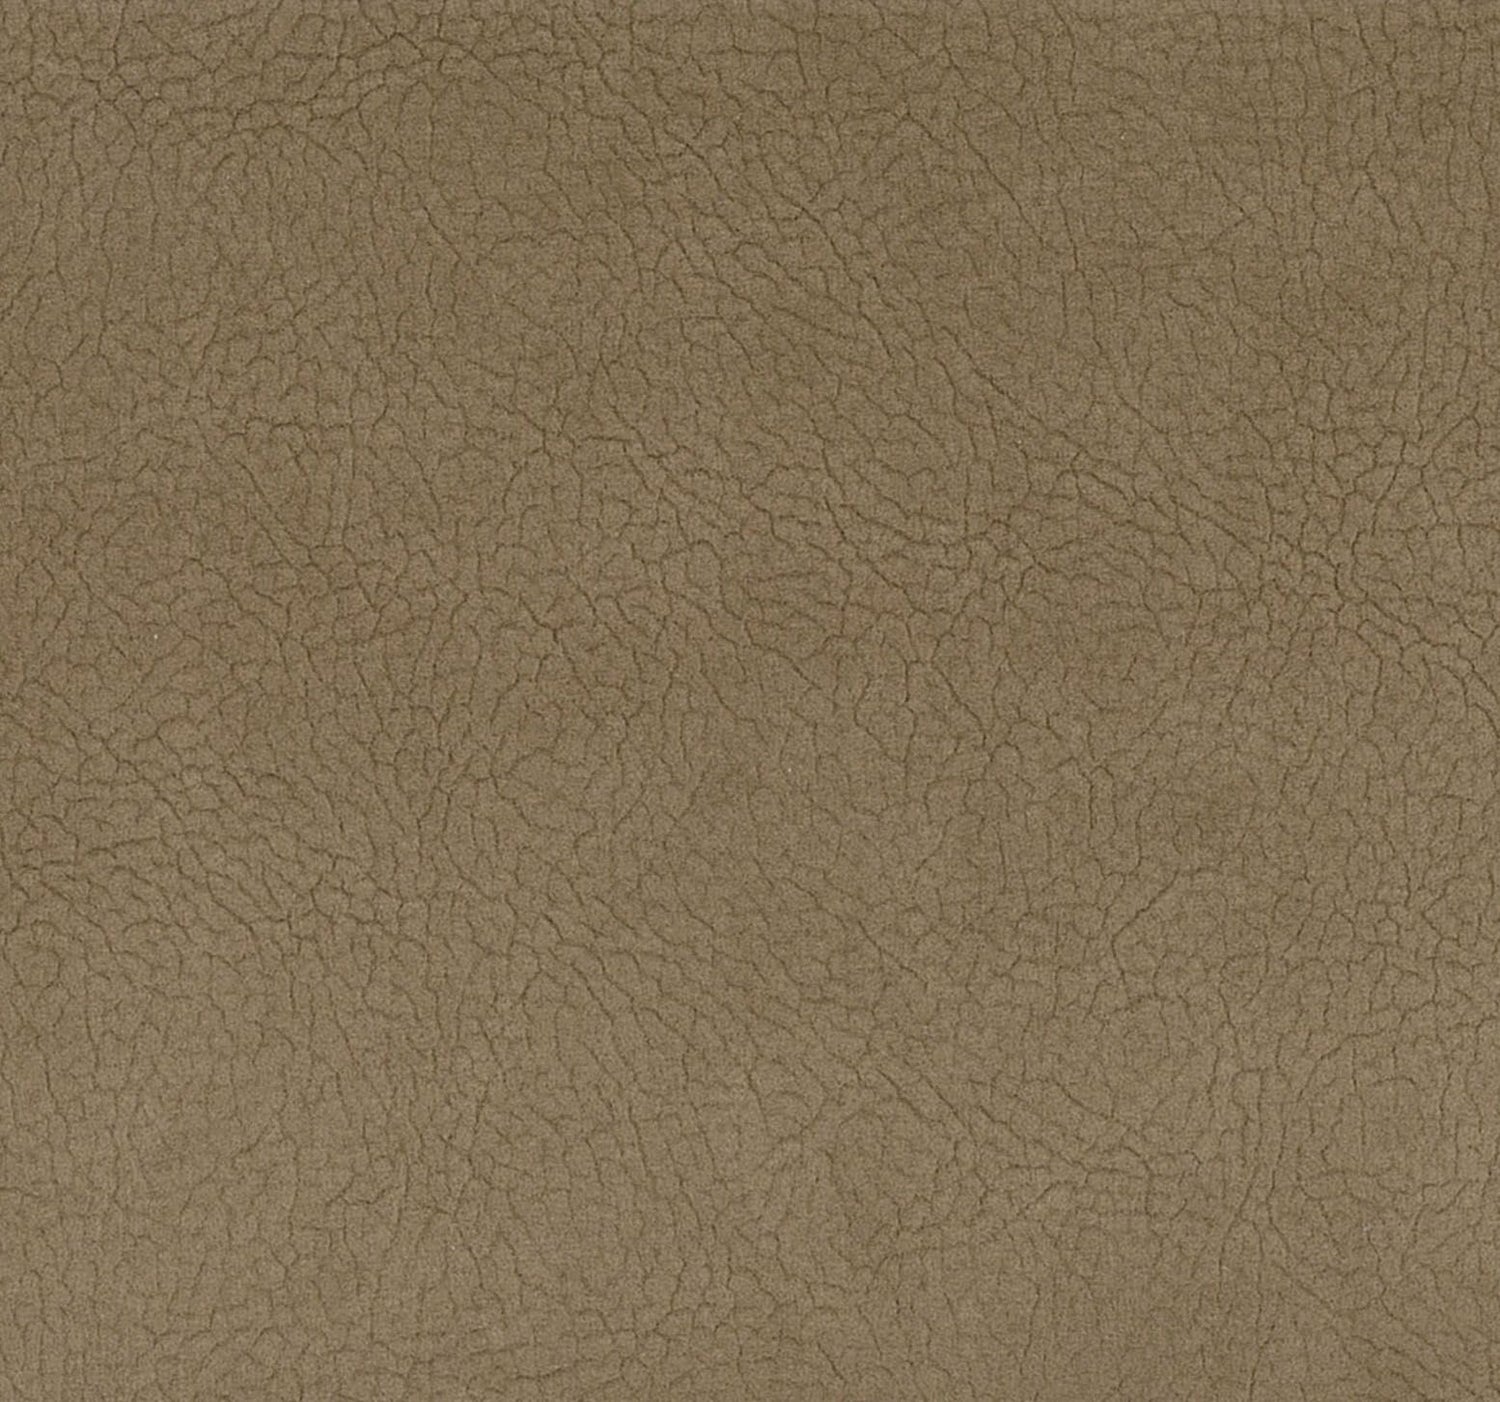 Georgia Suede fabric in dune color - pattern number H6 37465937 - by Scalamandre in the Old World Weavers collection